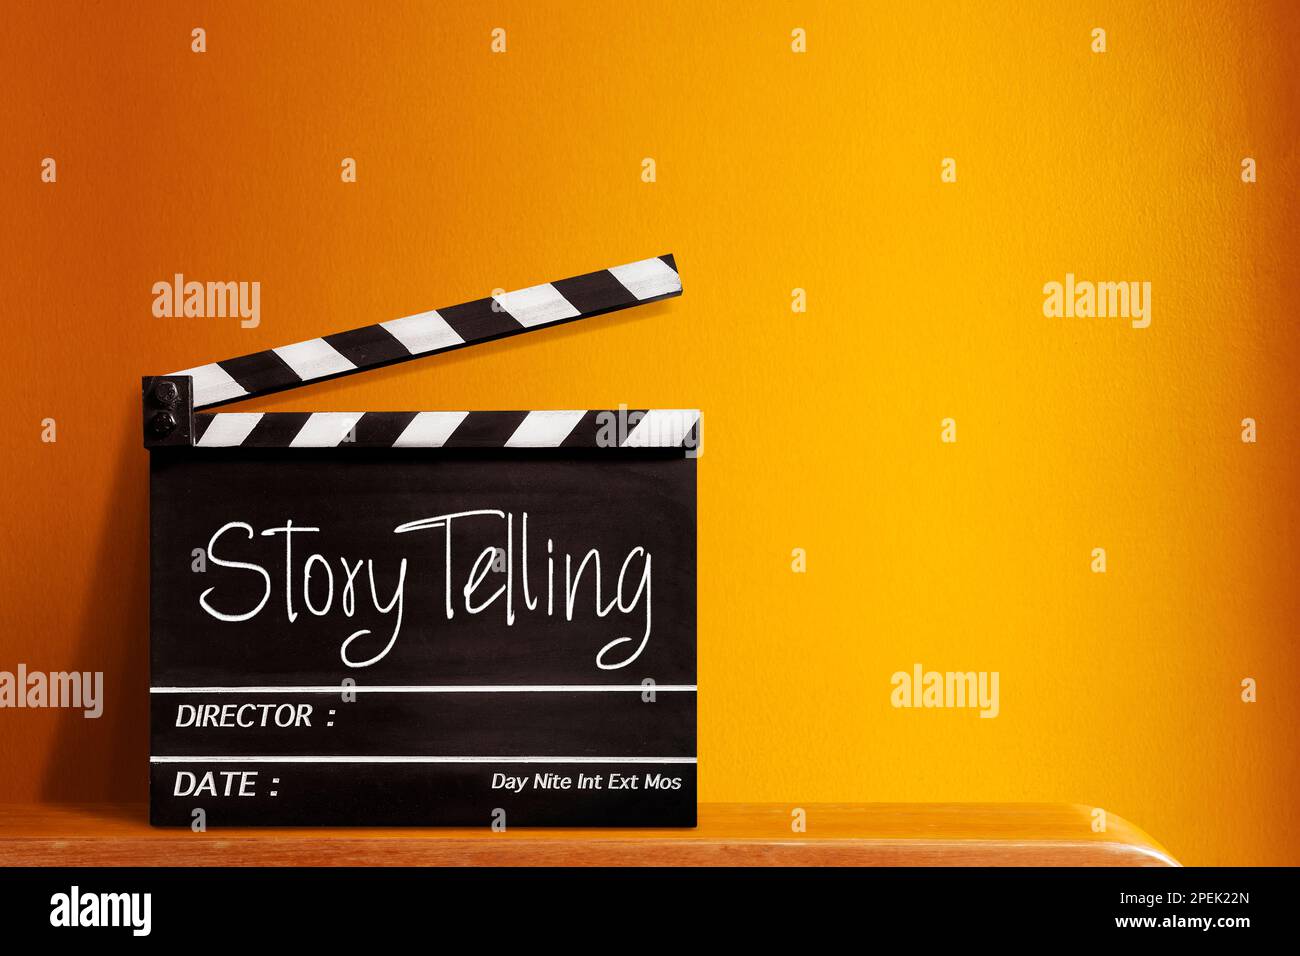 Story telling text title on film slate. Stock Photo